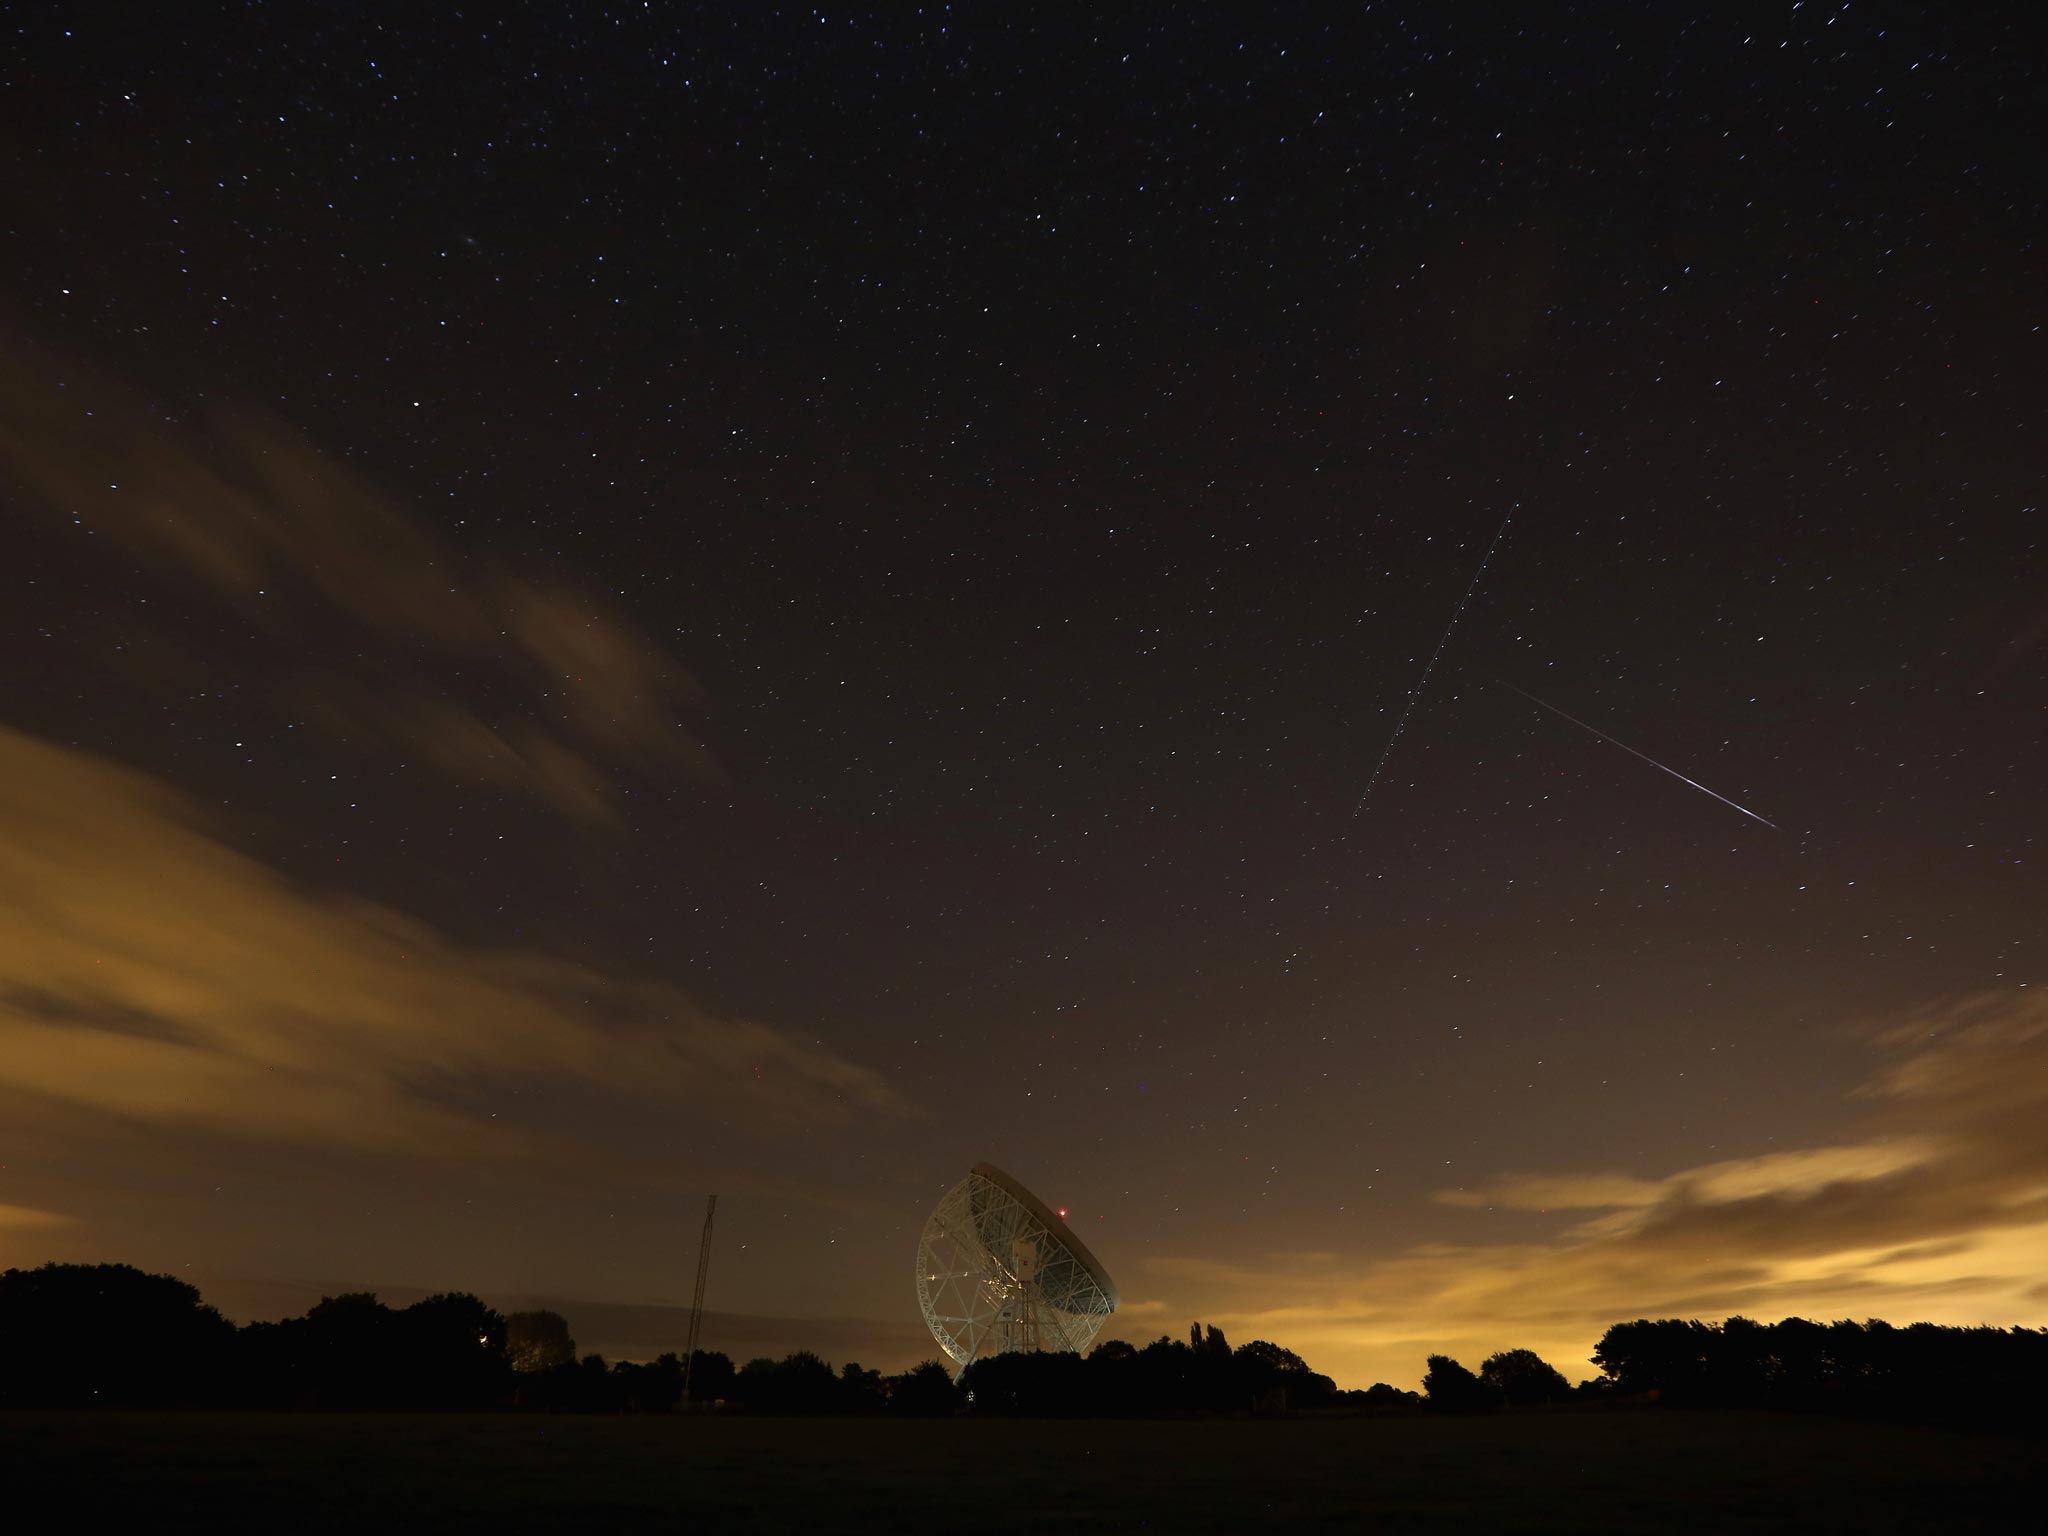 A Perseid meteor (right) streaks across the sky past the light trail of an aircraft over the Lovell Radio Telescope at Jodrell Bank in Holmes Chapel, United Kingdom